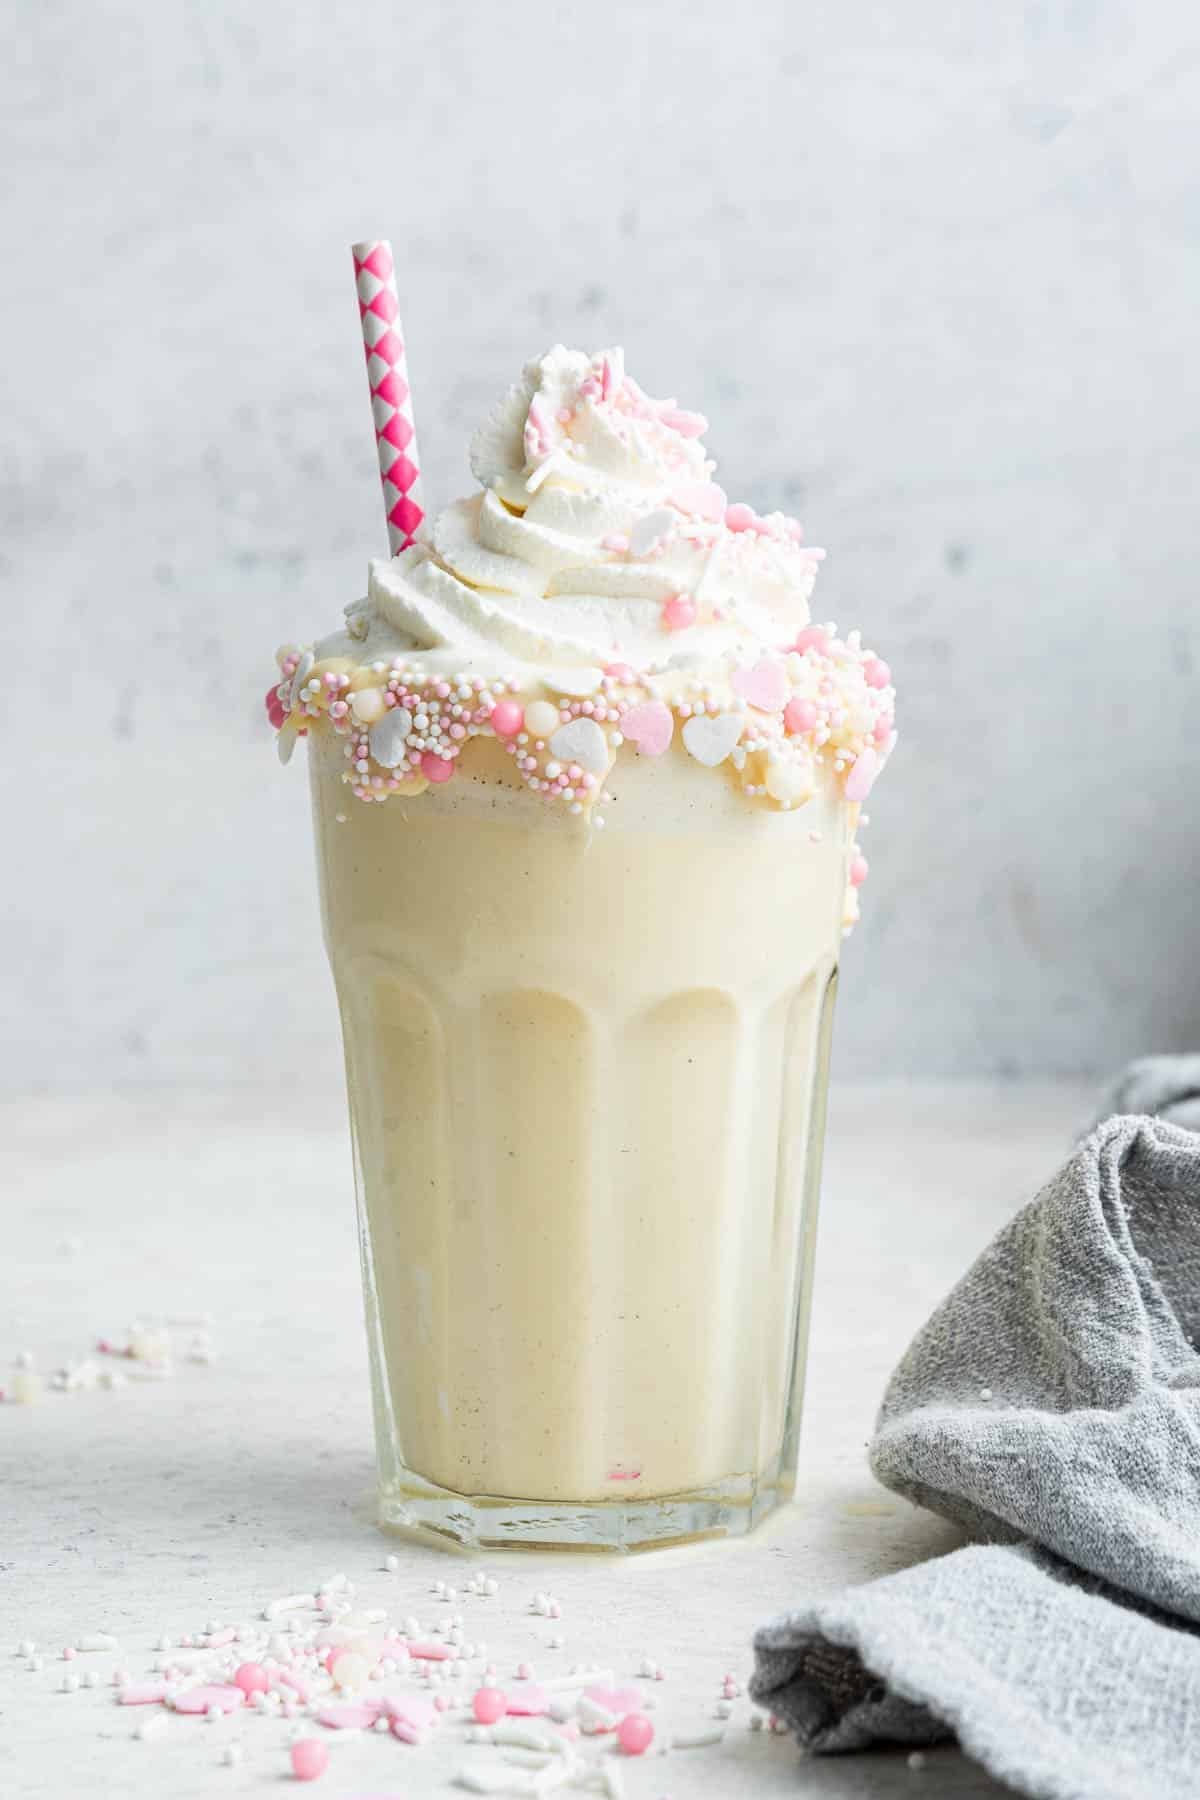 Vanilla dessert drink in glass with whipped cream, sprinkles and a straw.